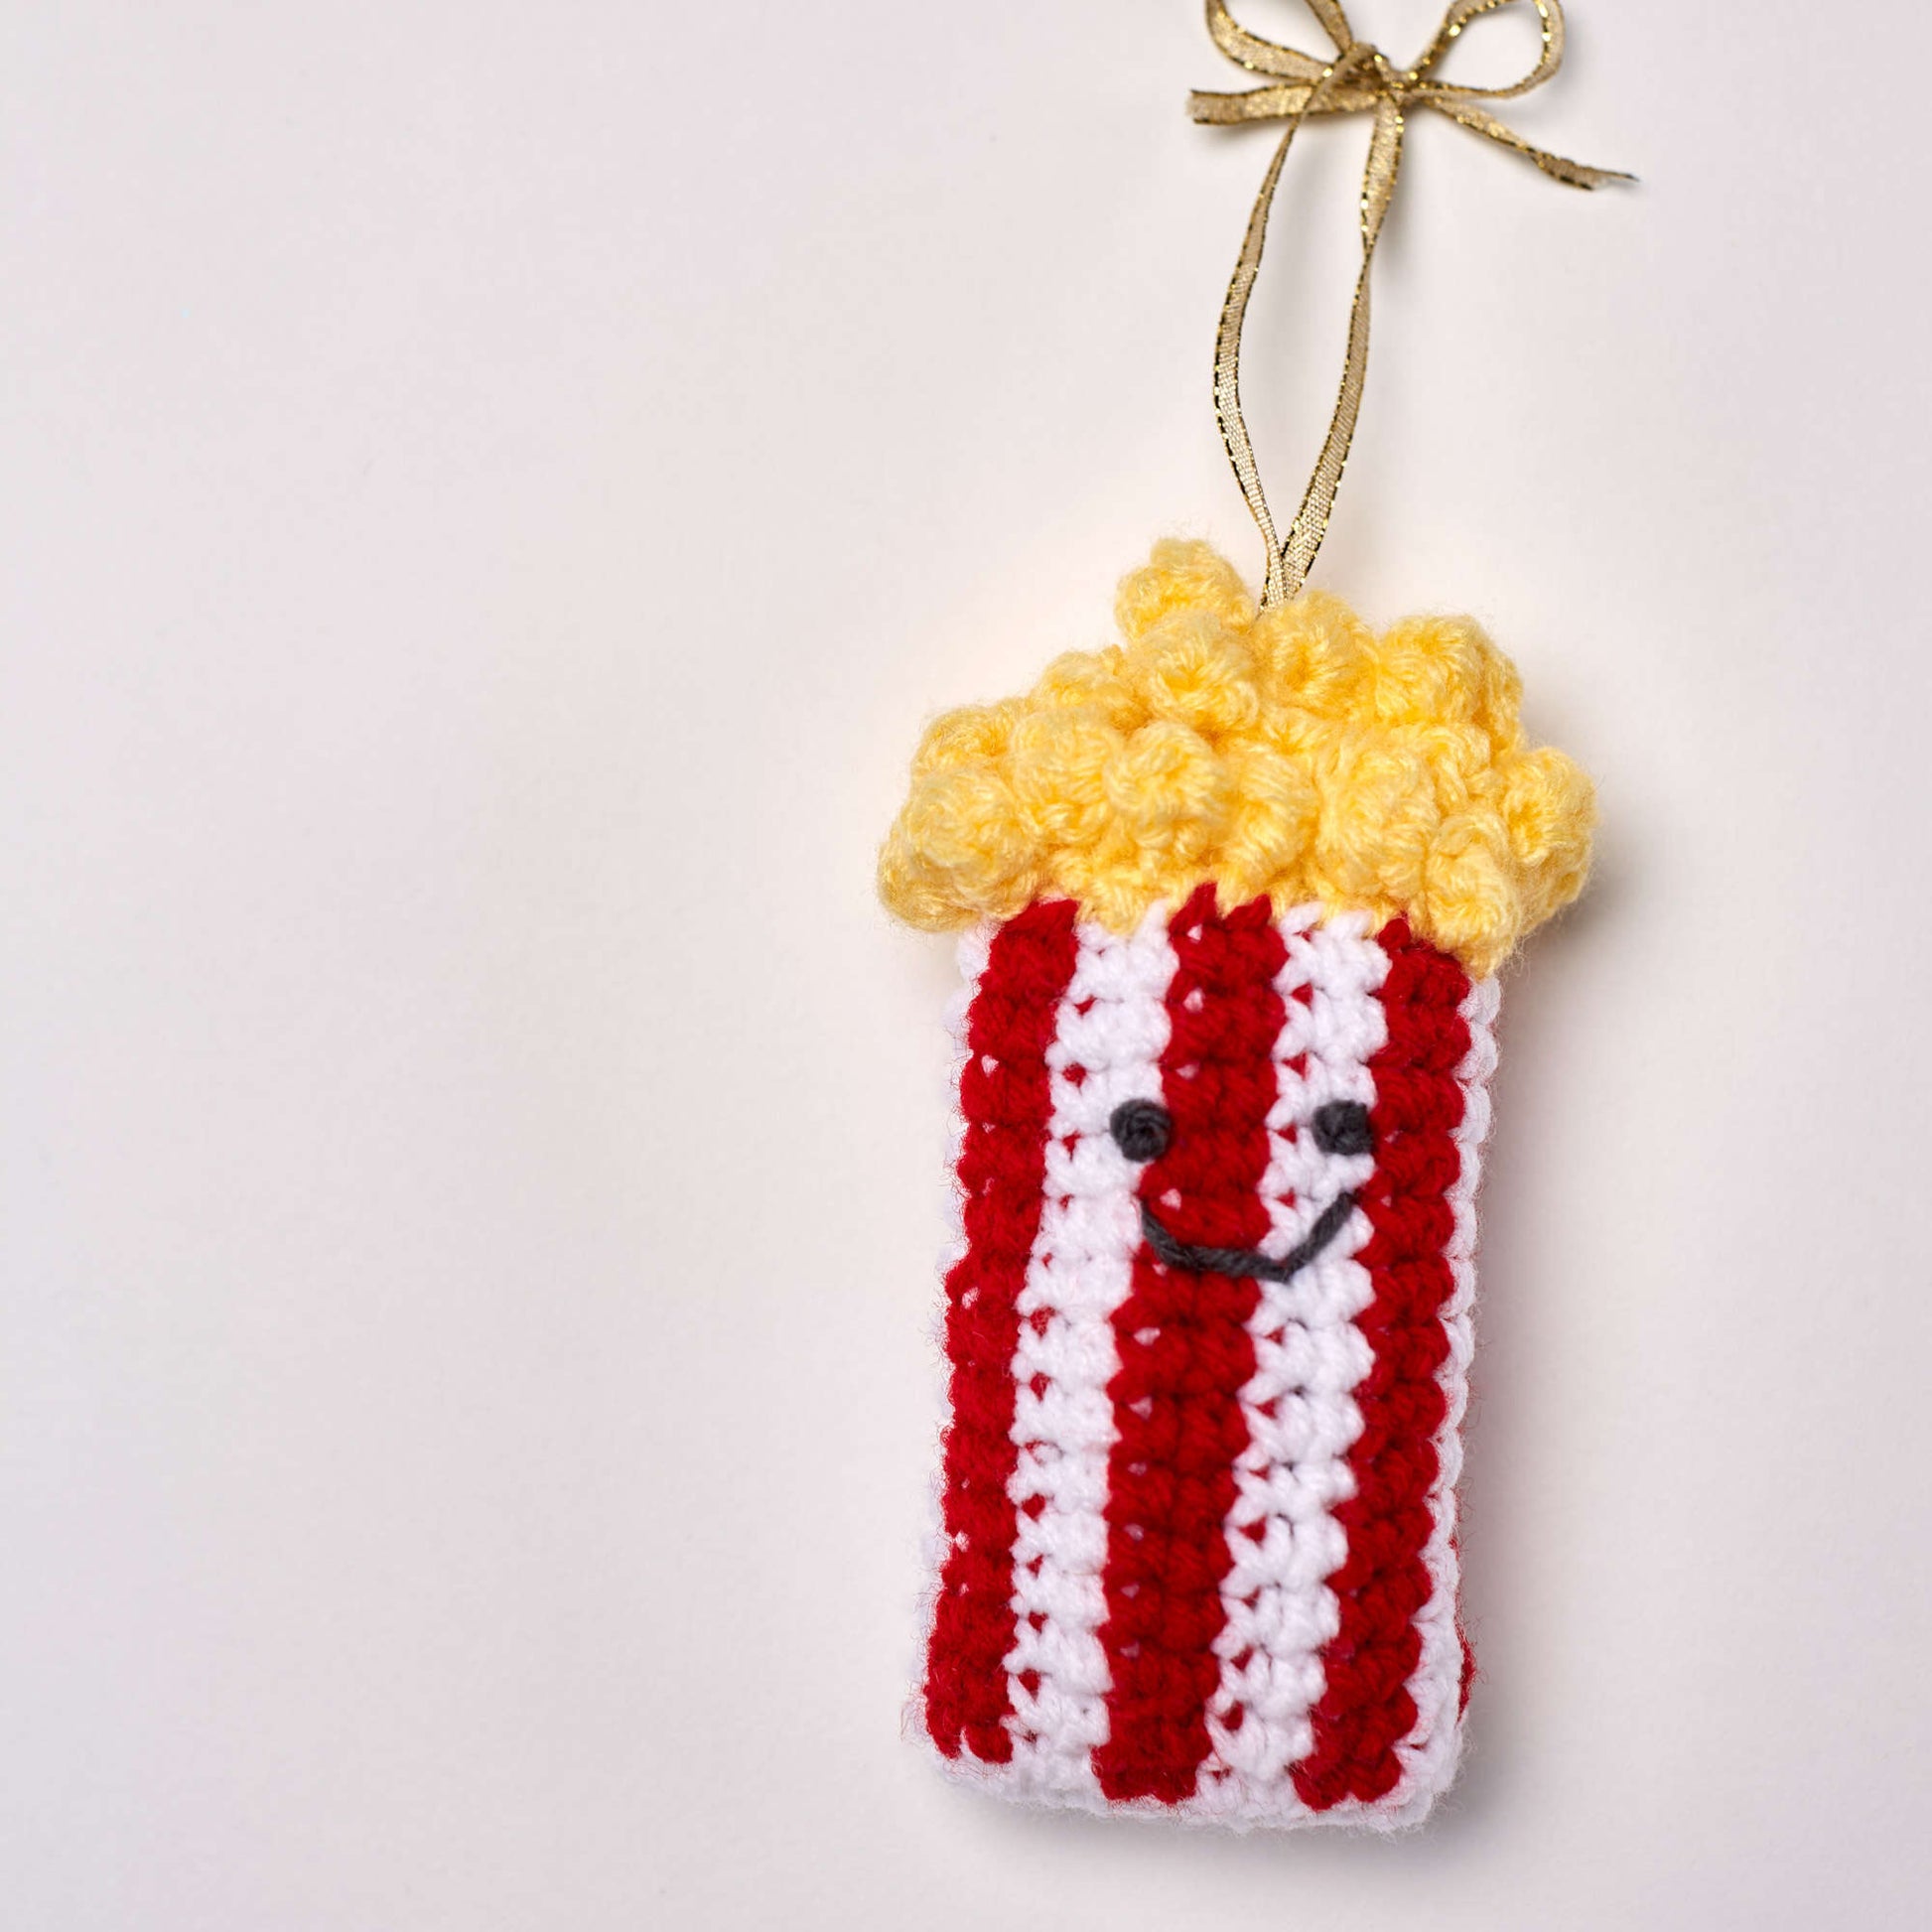 Free Red Heart Bag Of Popcorn Ornament Pattern